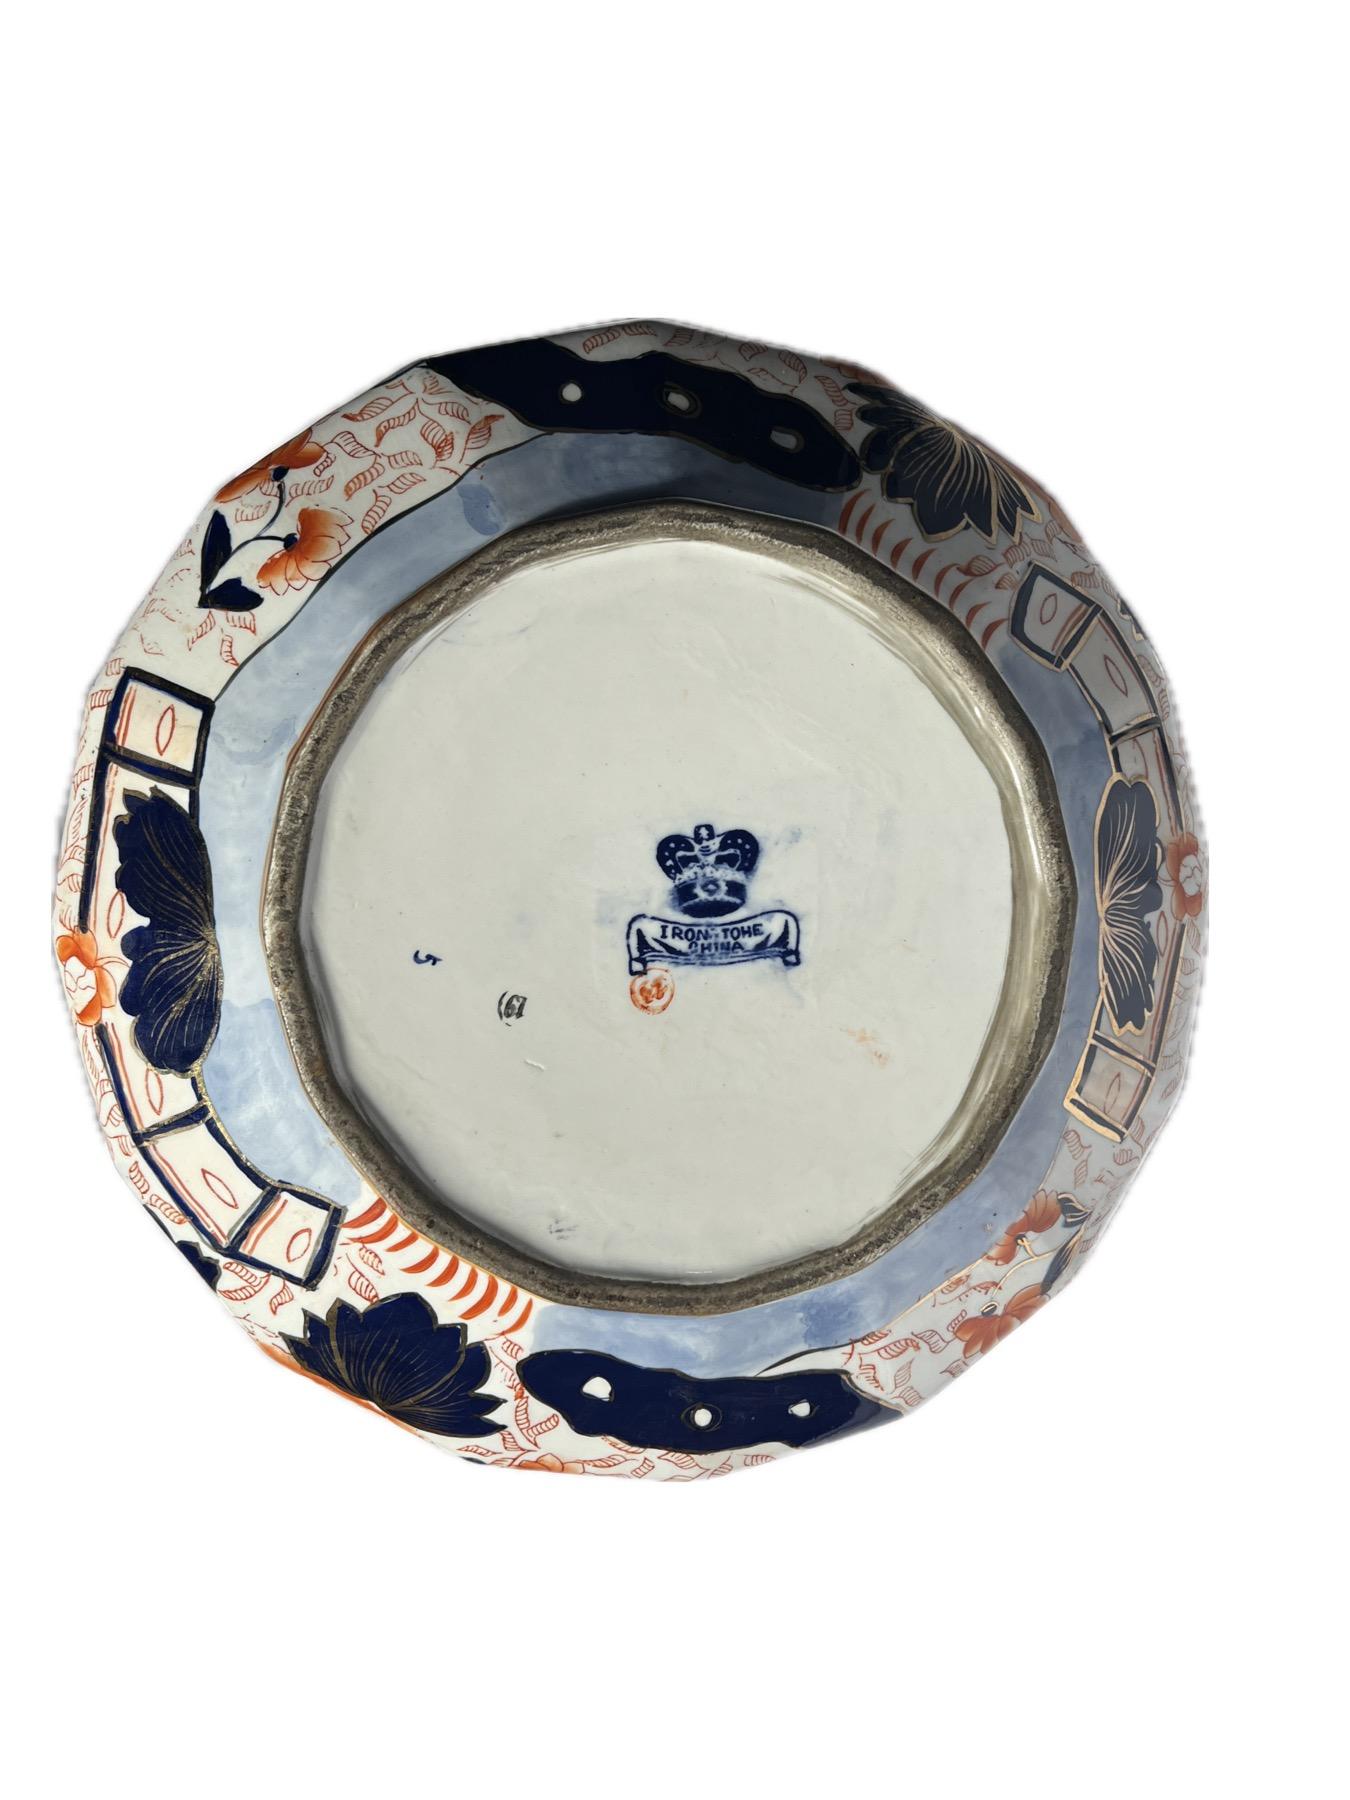 Estate English Red and Blue Ironstone Centerpiece Bowl, Circa 1950's-1960's. For Sale 2